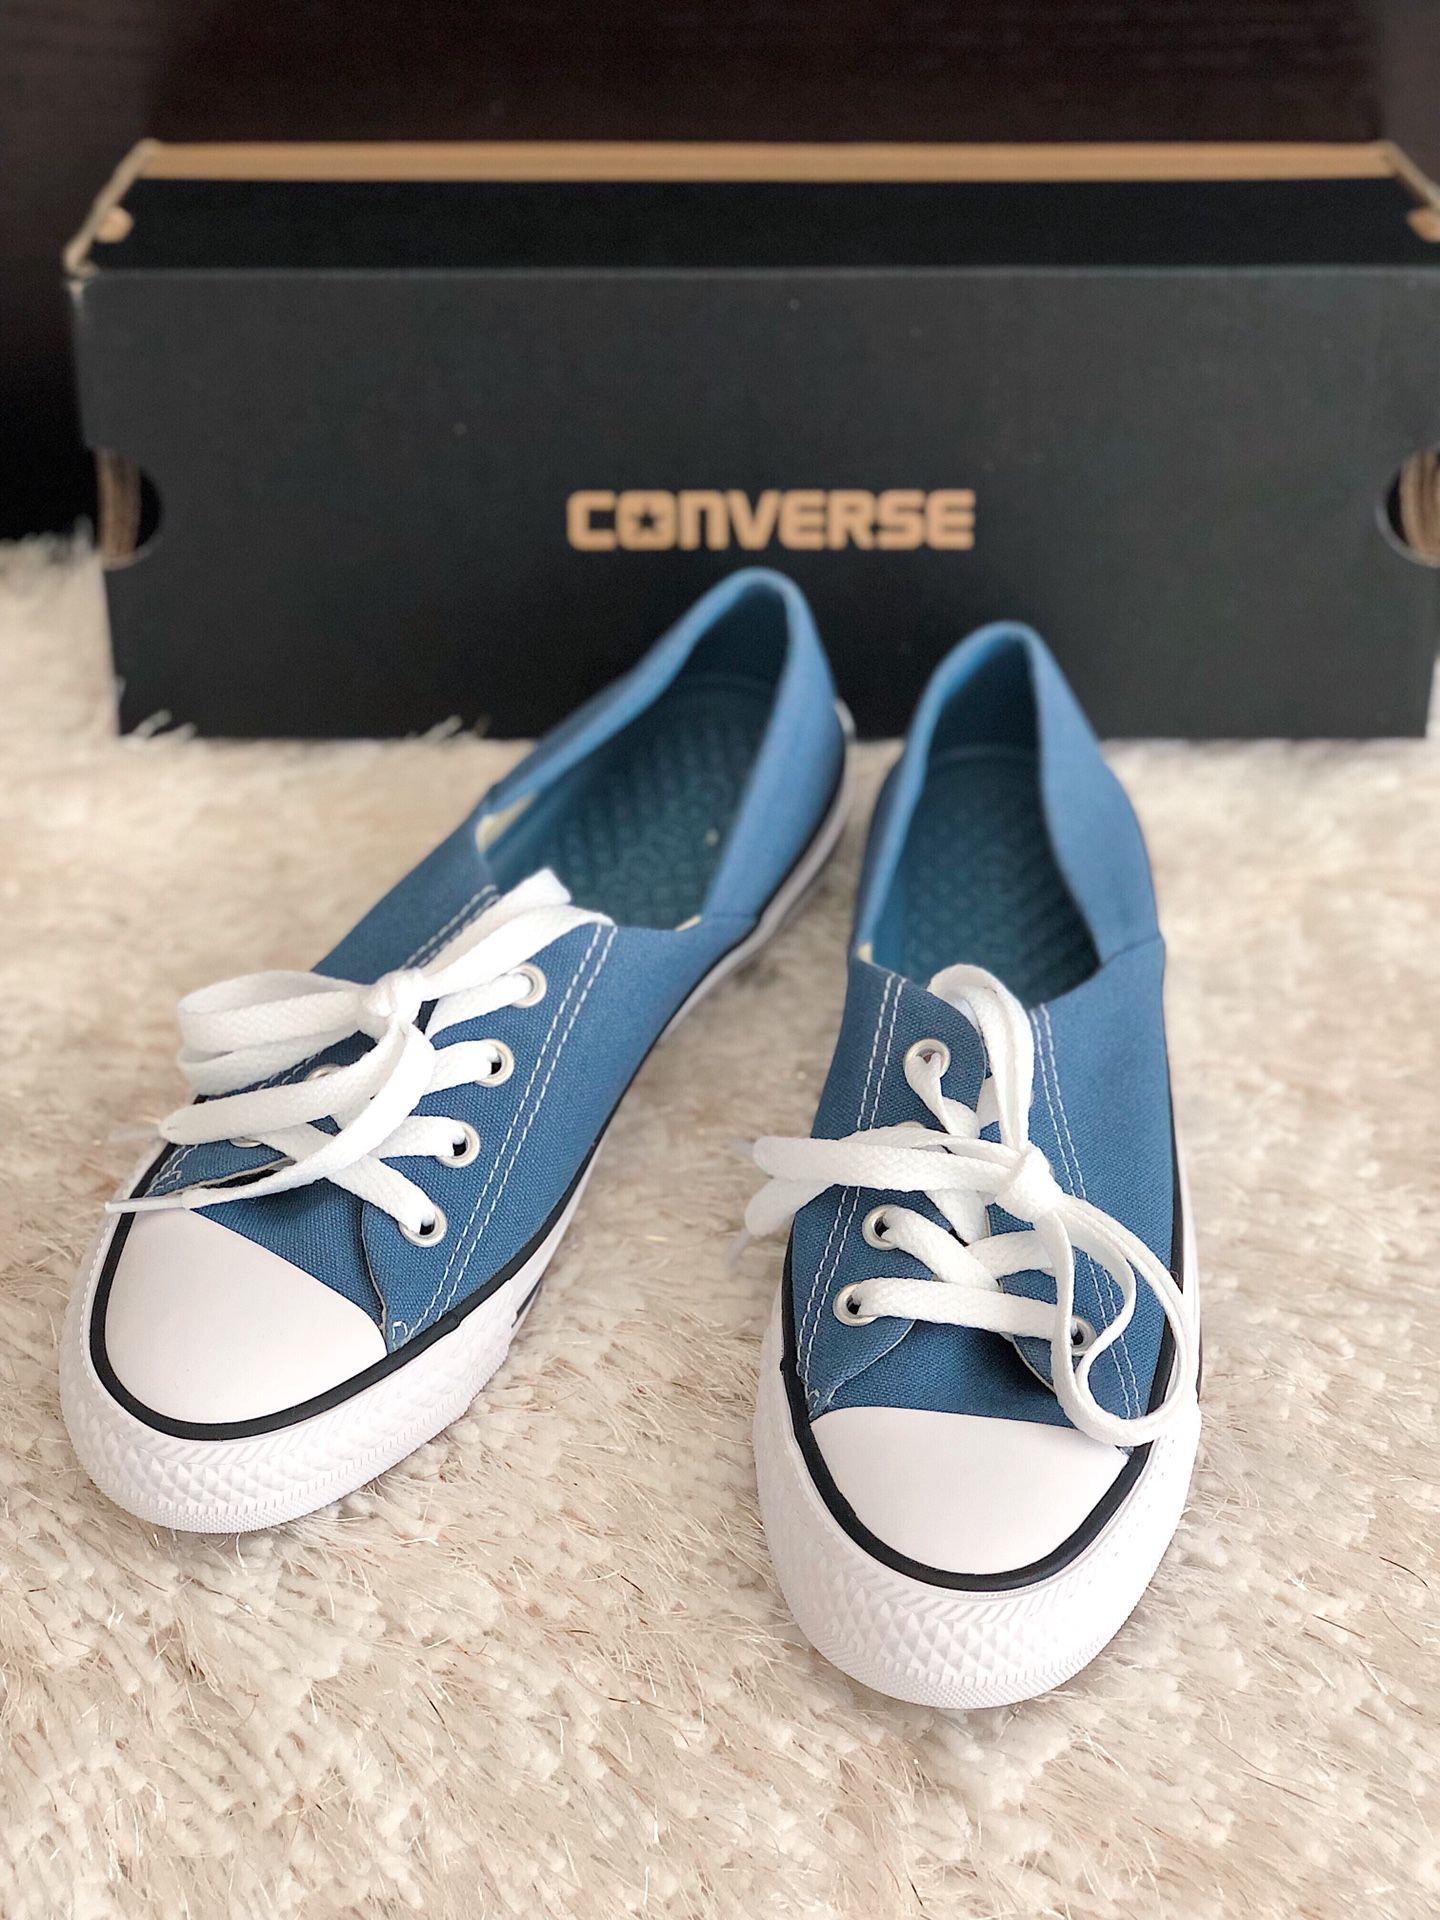 ✨New CONVERSE Chuck Taylor All Star Ctas Coral Ox Blue Sneakers Women’s Shoes Size 5.5M